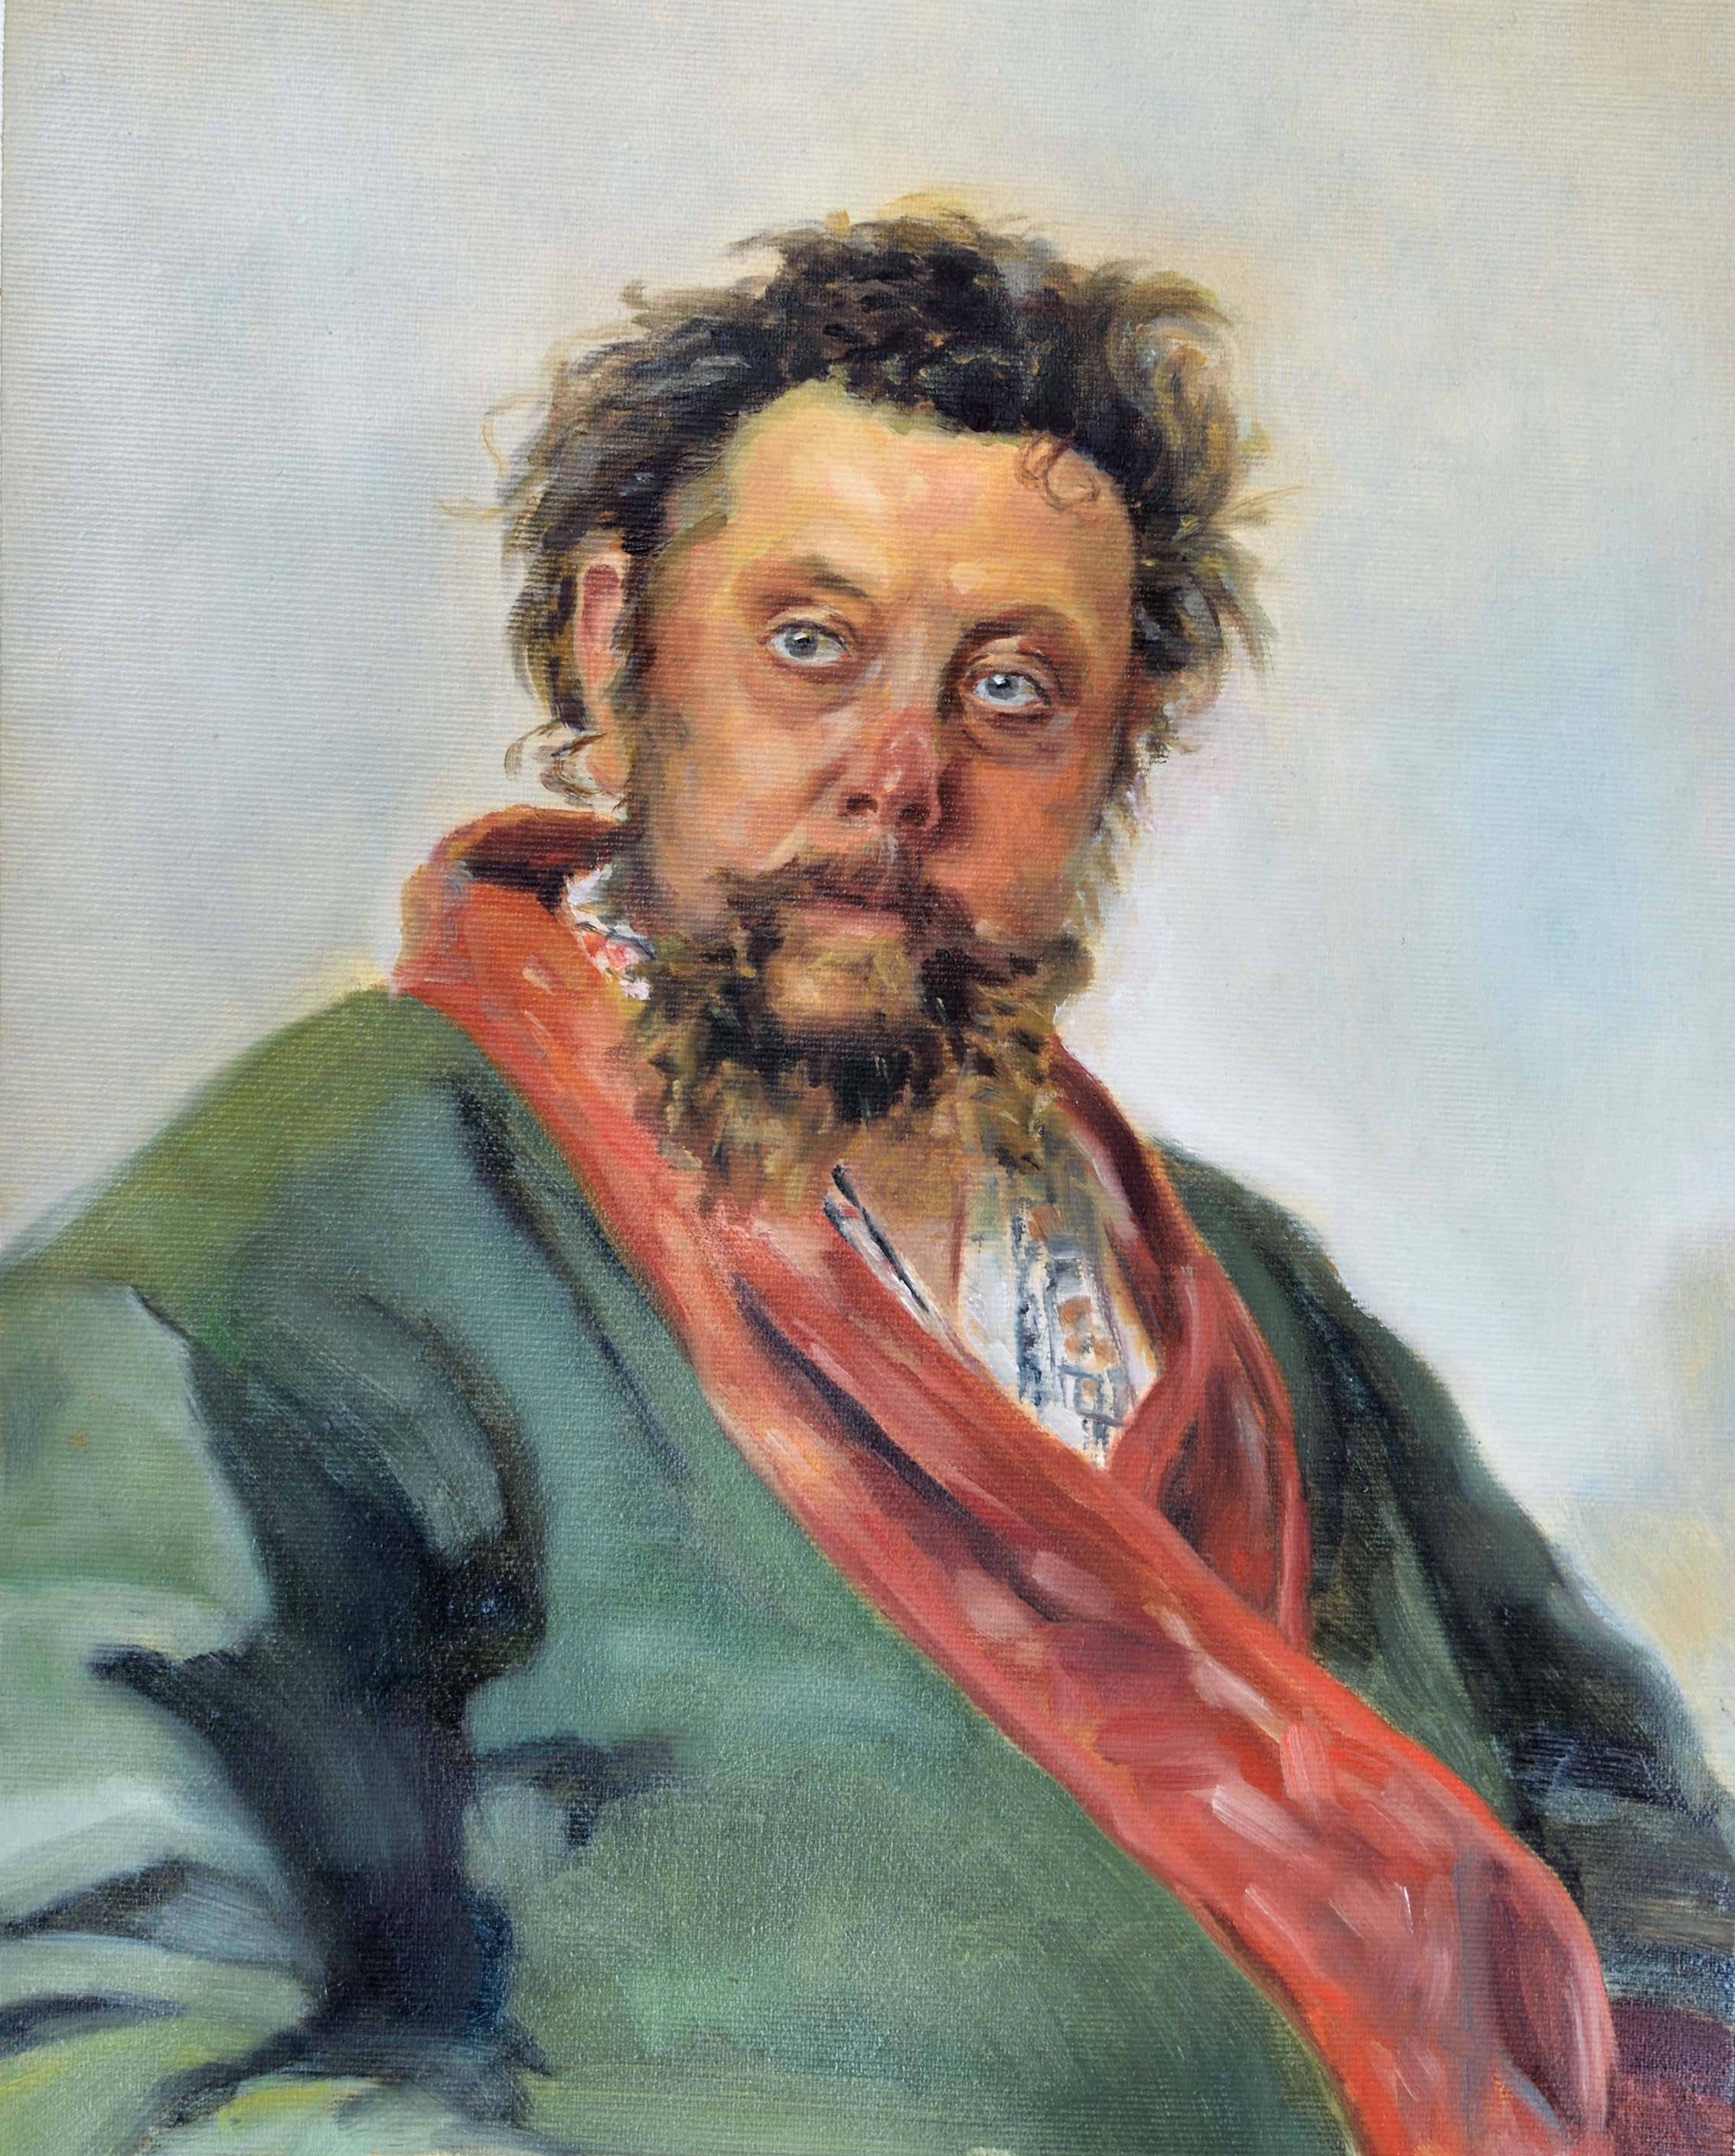 Copy of the painting Composer Modest Mussorgsky (1881) by Ilya Repin, oil on canvas, 40 x 30 cm, 2017